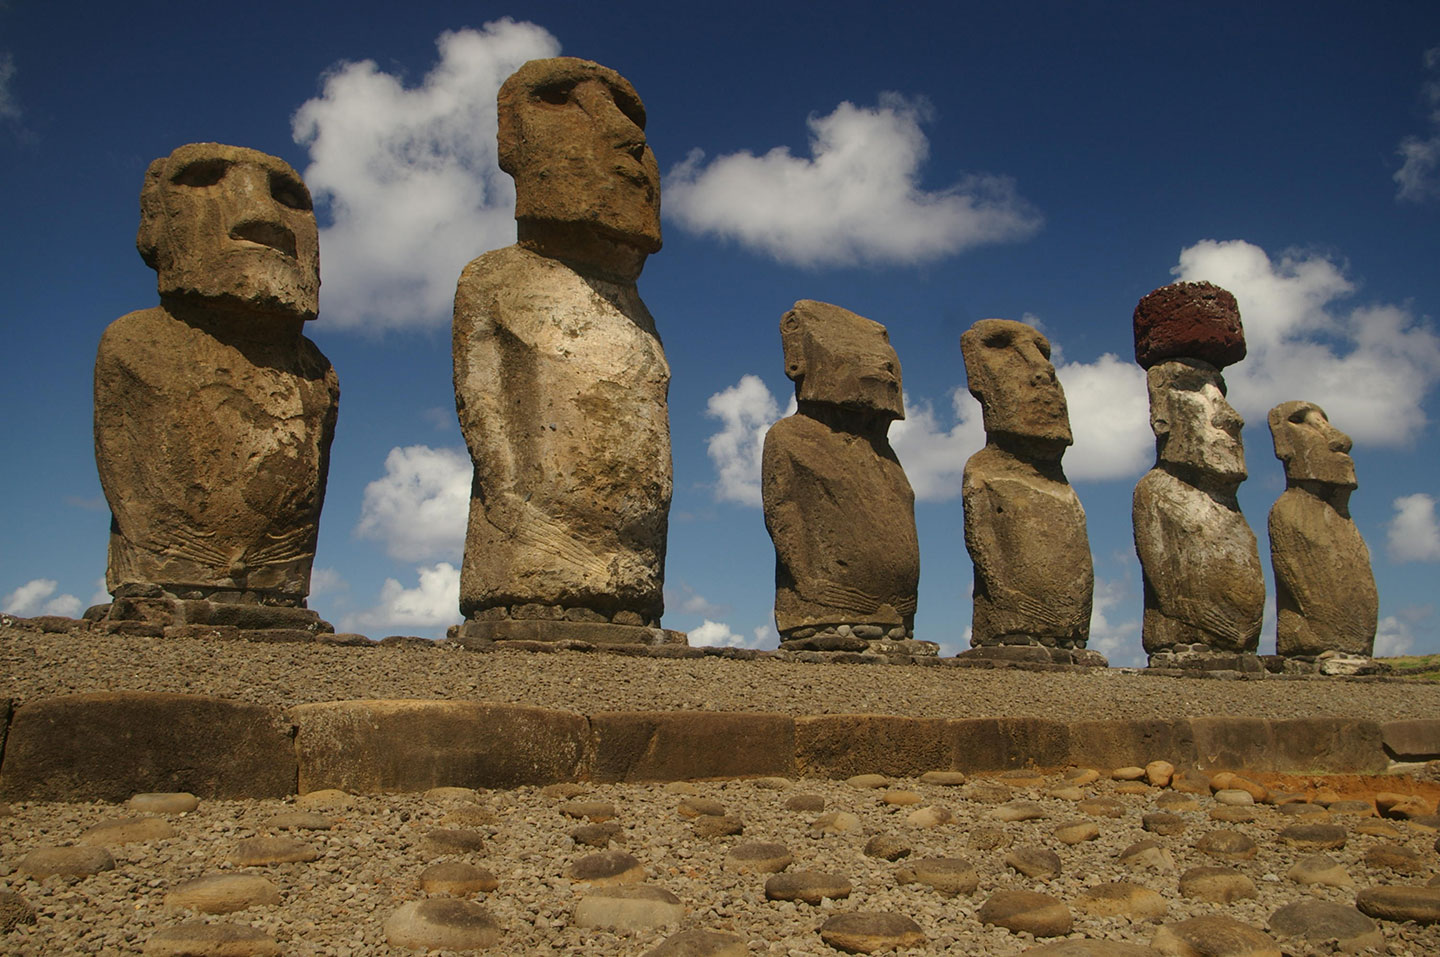 The Moai Statues on a partially cloudy day